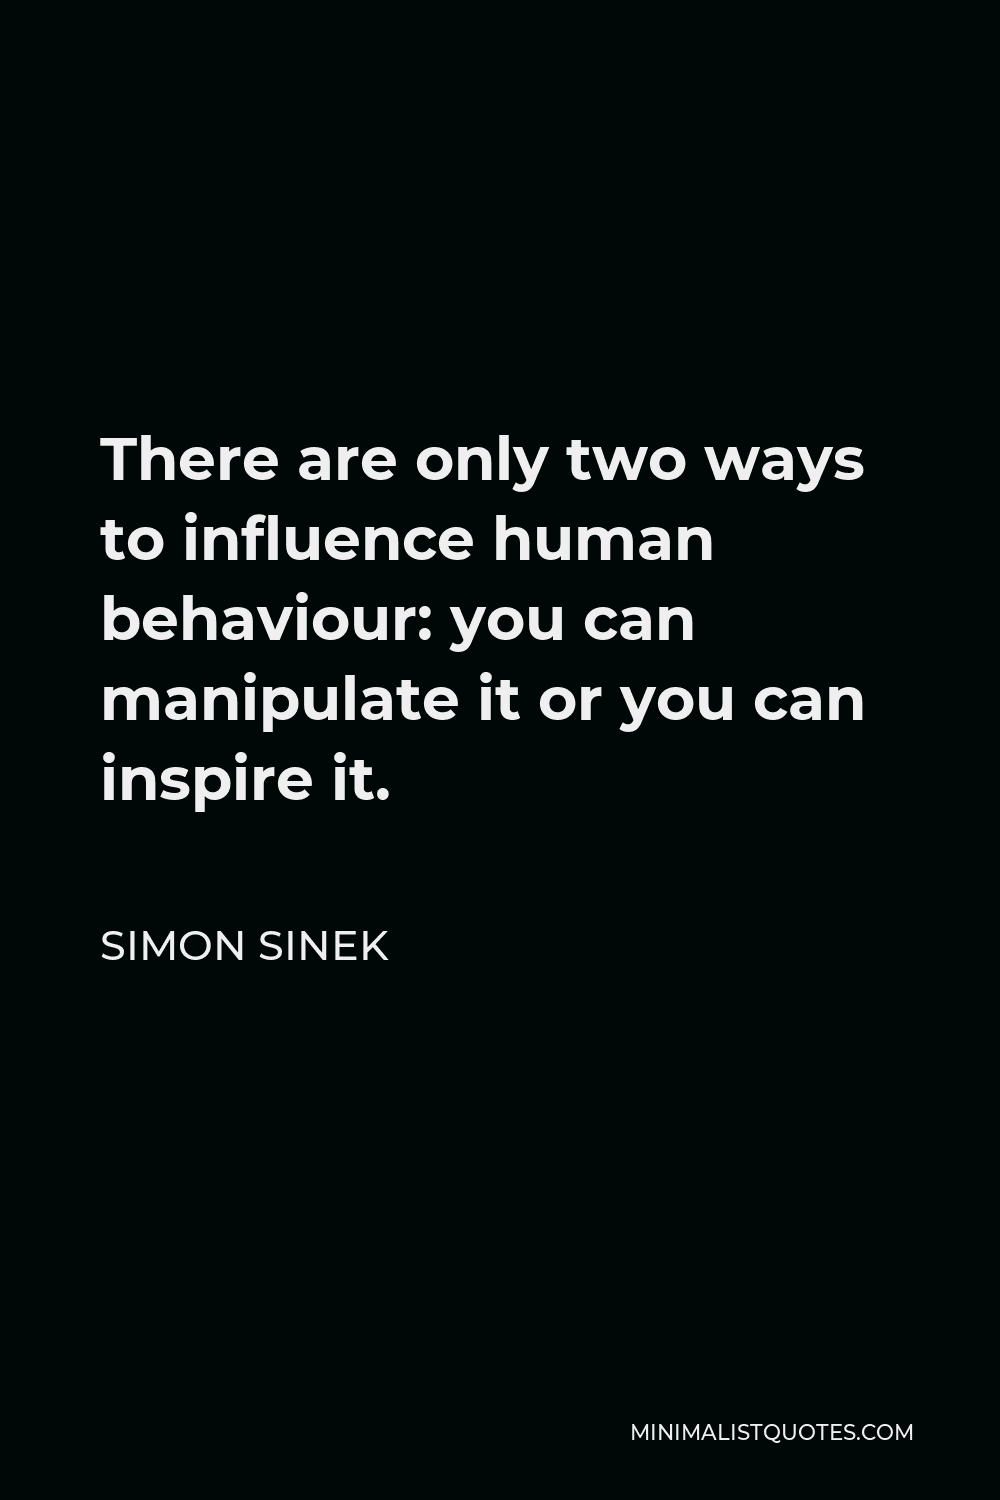 Simon Sinek Quote - There are only two ways to influence human behaviour: you can manipulate it or you can inspire it.